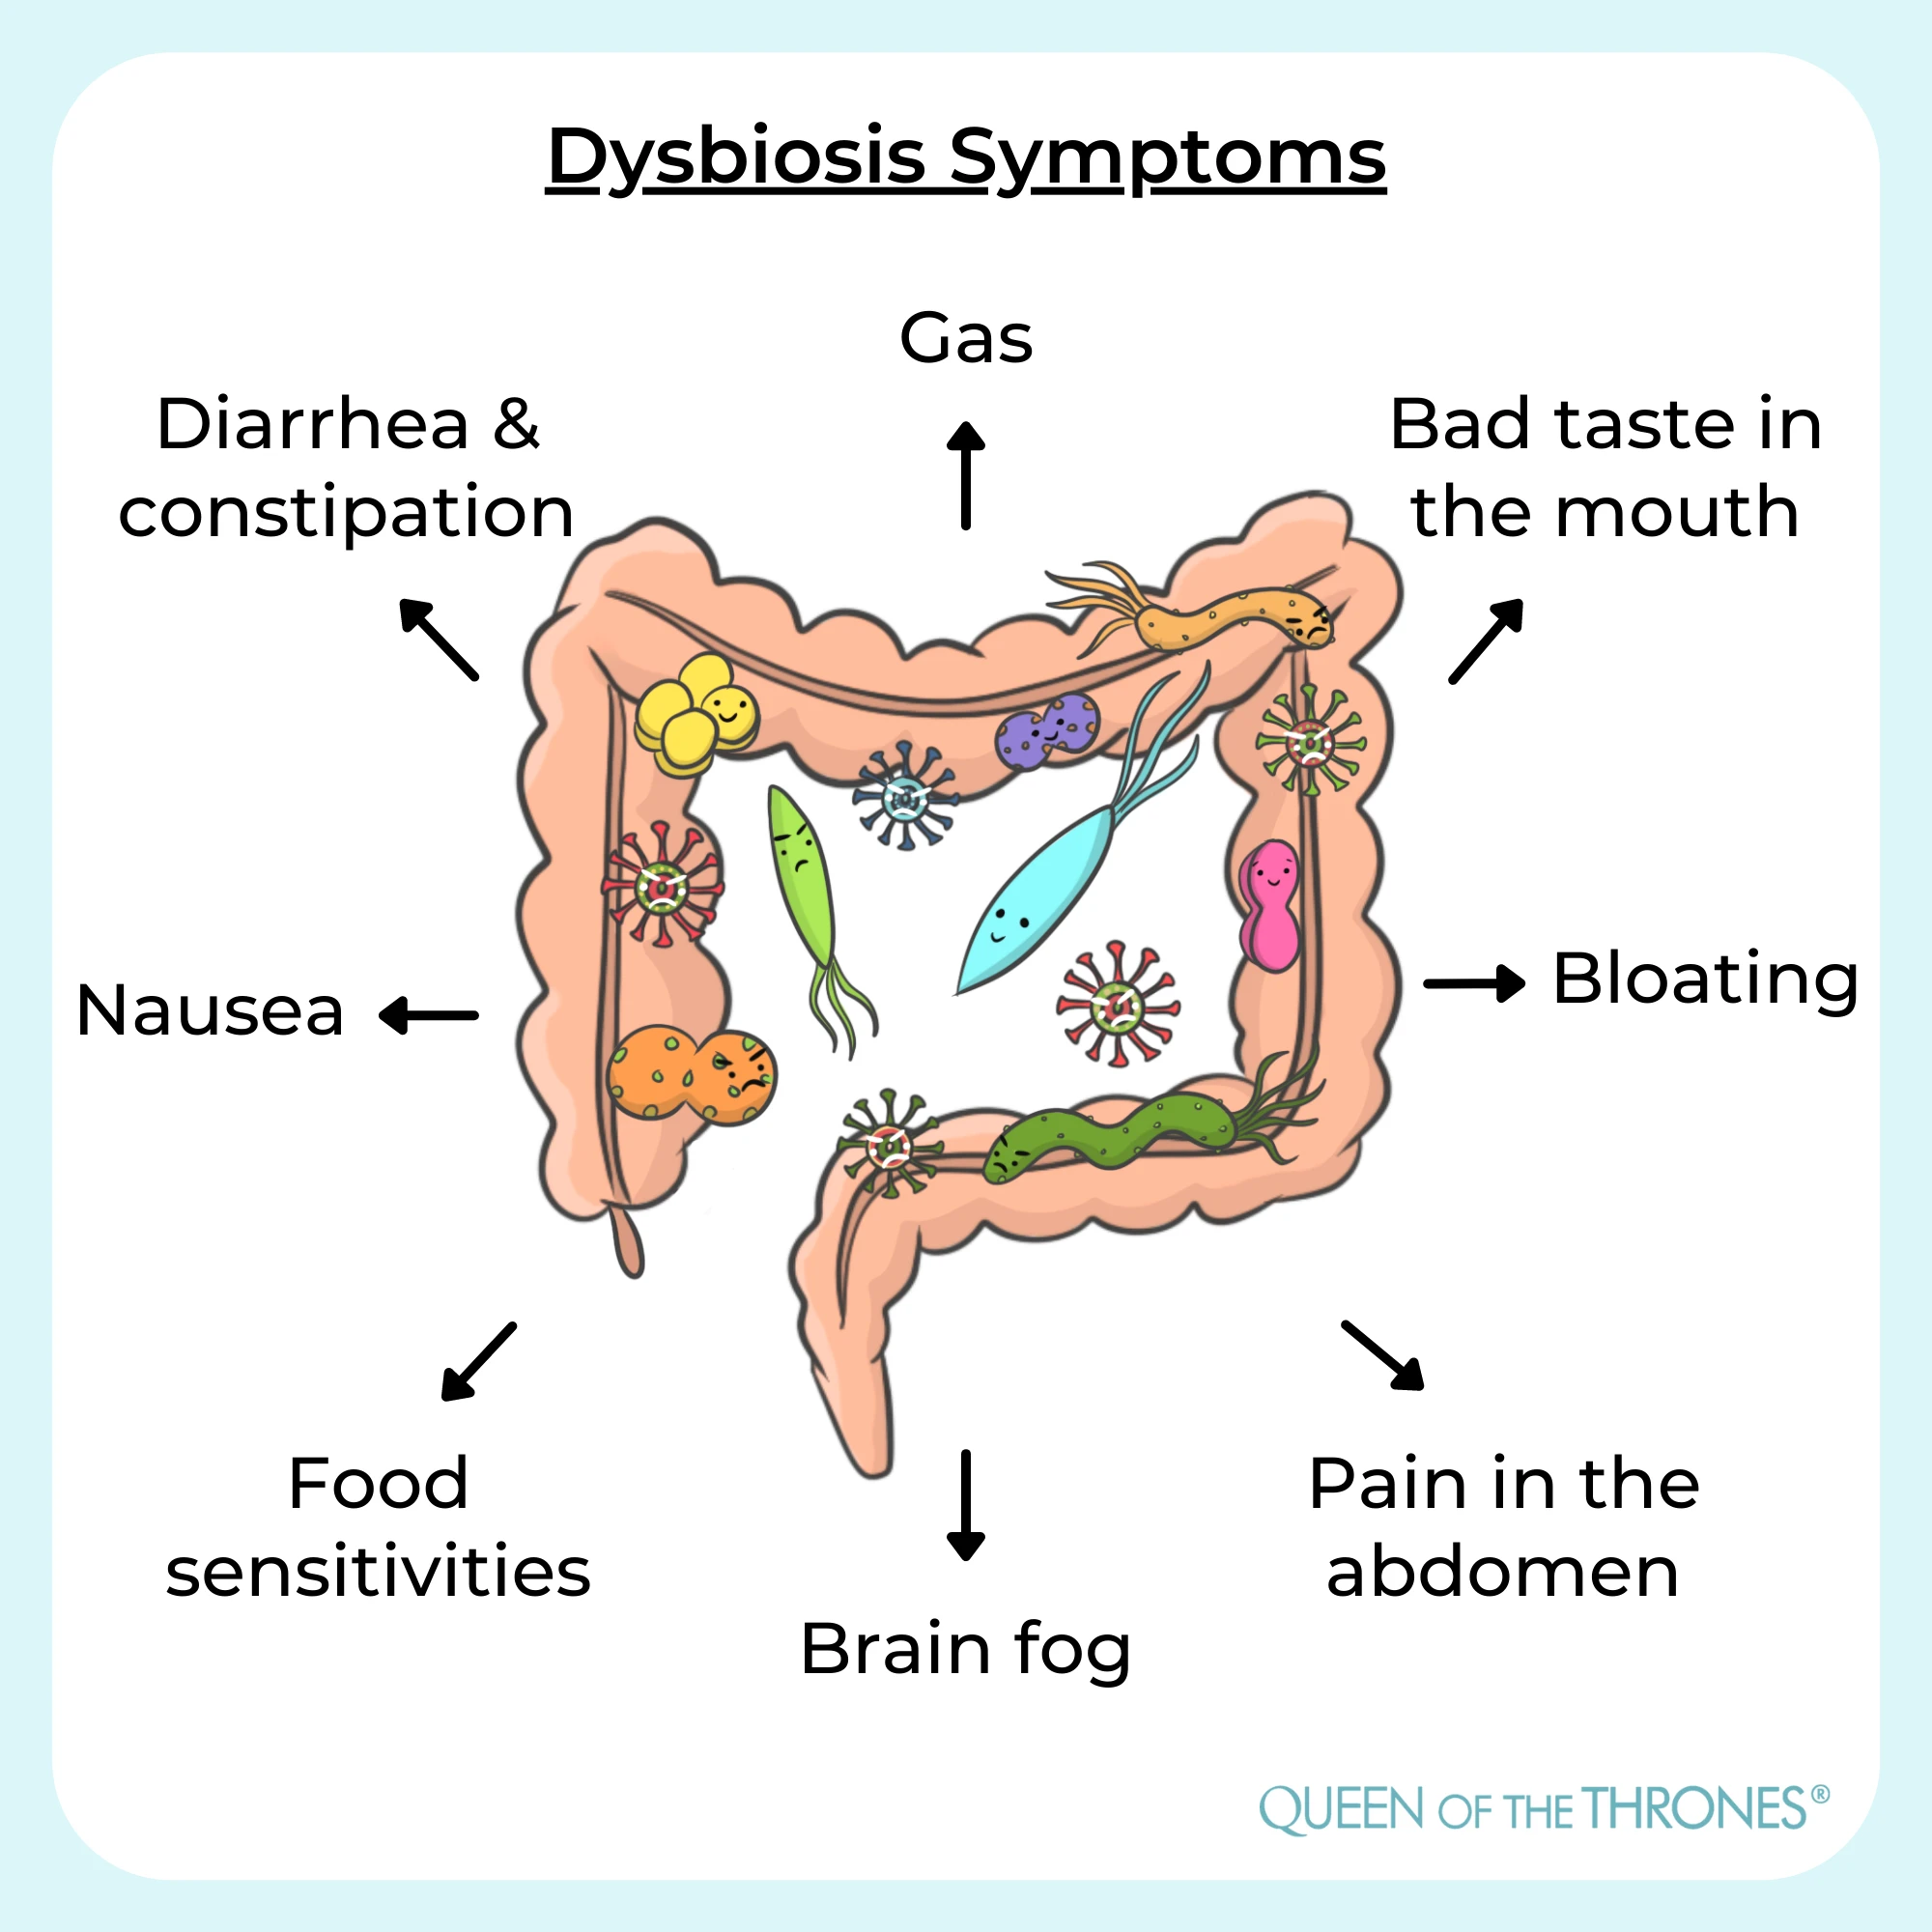 Dysbiosis symptoms by Queen of the Thrones